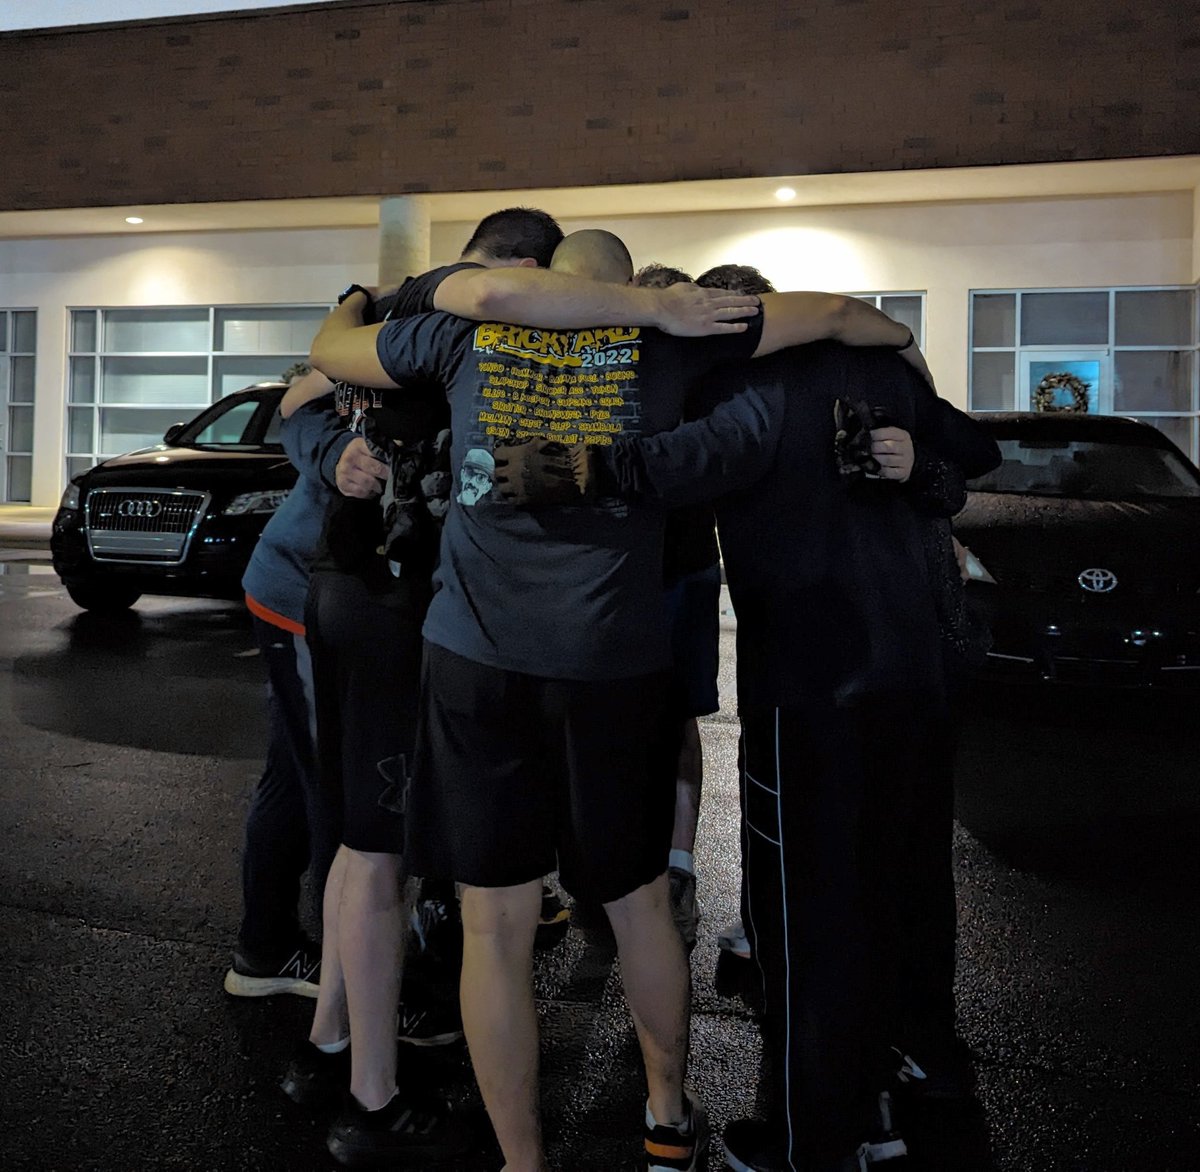 7x PAX for the #AO_Brickyard and 1x PAX running solo for #AO_ColdStart. Chilly, wet and still had a good Beatdown. So, what are you waiting on - join us in the gloom @F3Nation @MooresvilleNC